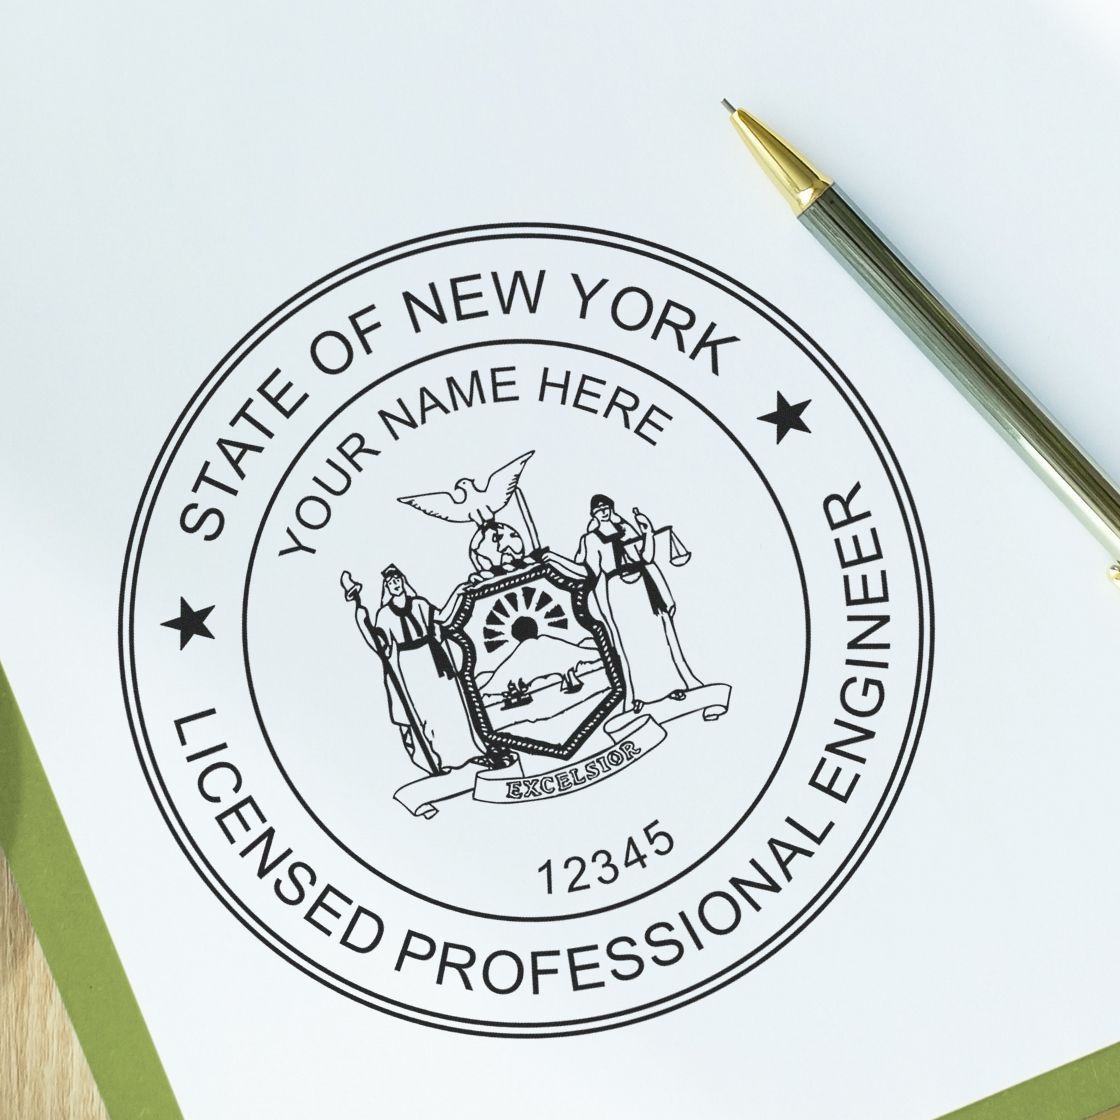 Another Example of a stamped impression of the New York Professional Engineer Seal Stamp on a piece of office paper.